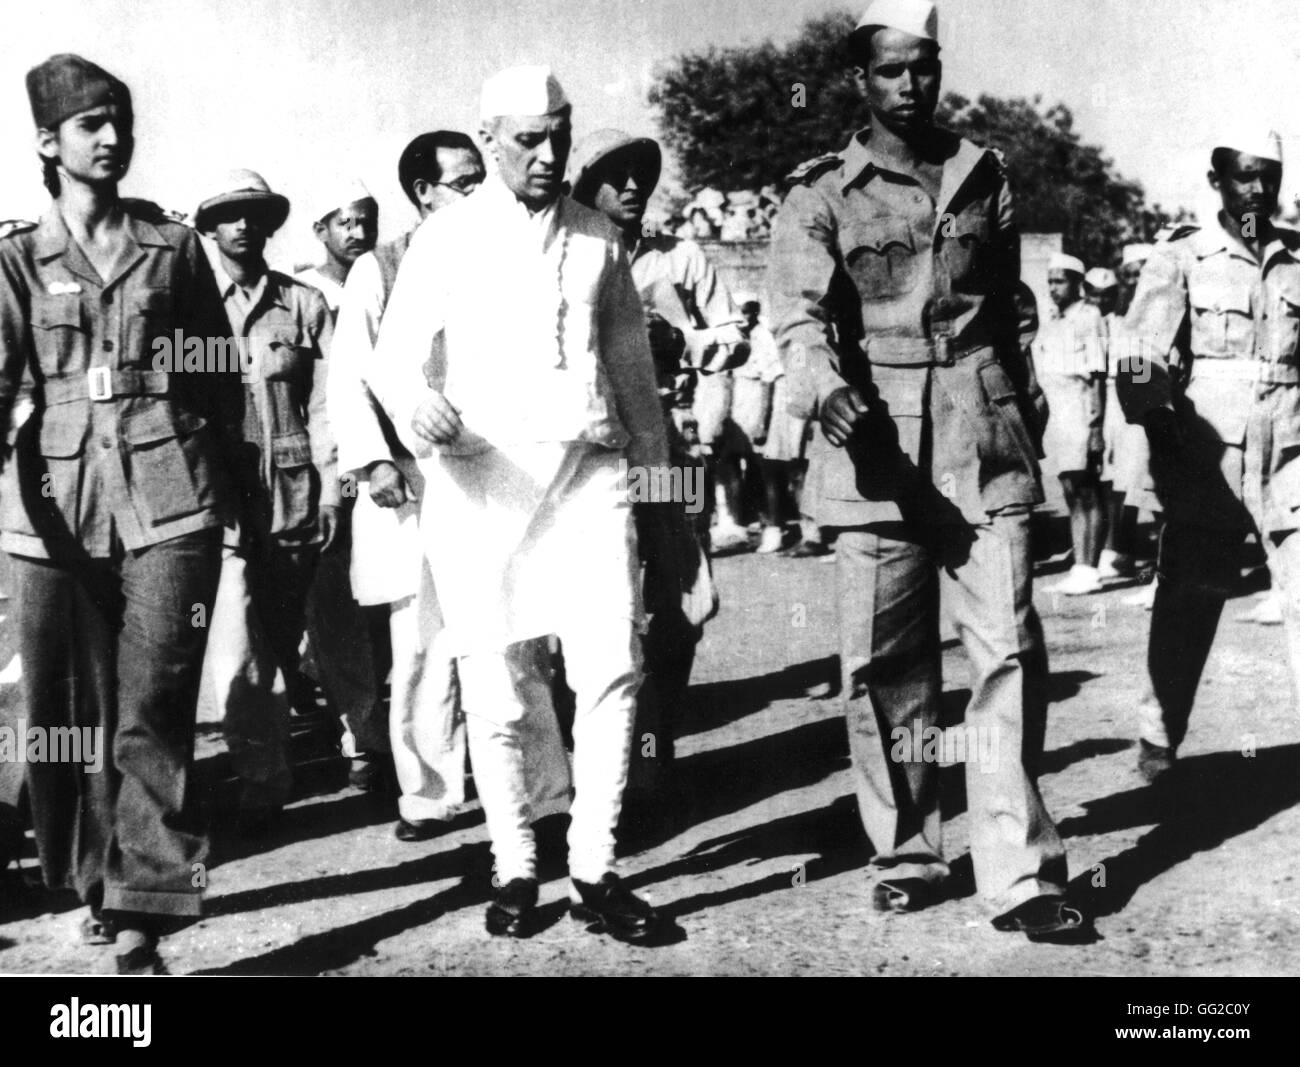 Nehru surrounded by voluntary soldiers 20th century India - Kashmir National Archives - Washington Stock Photo